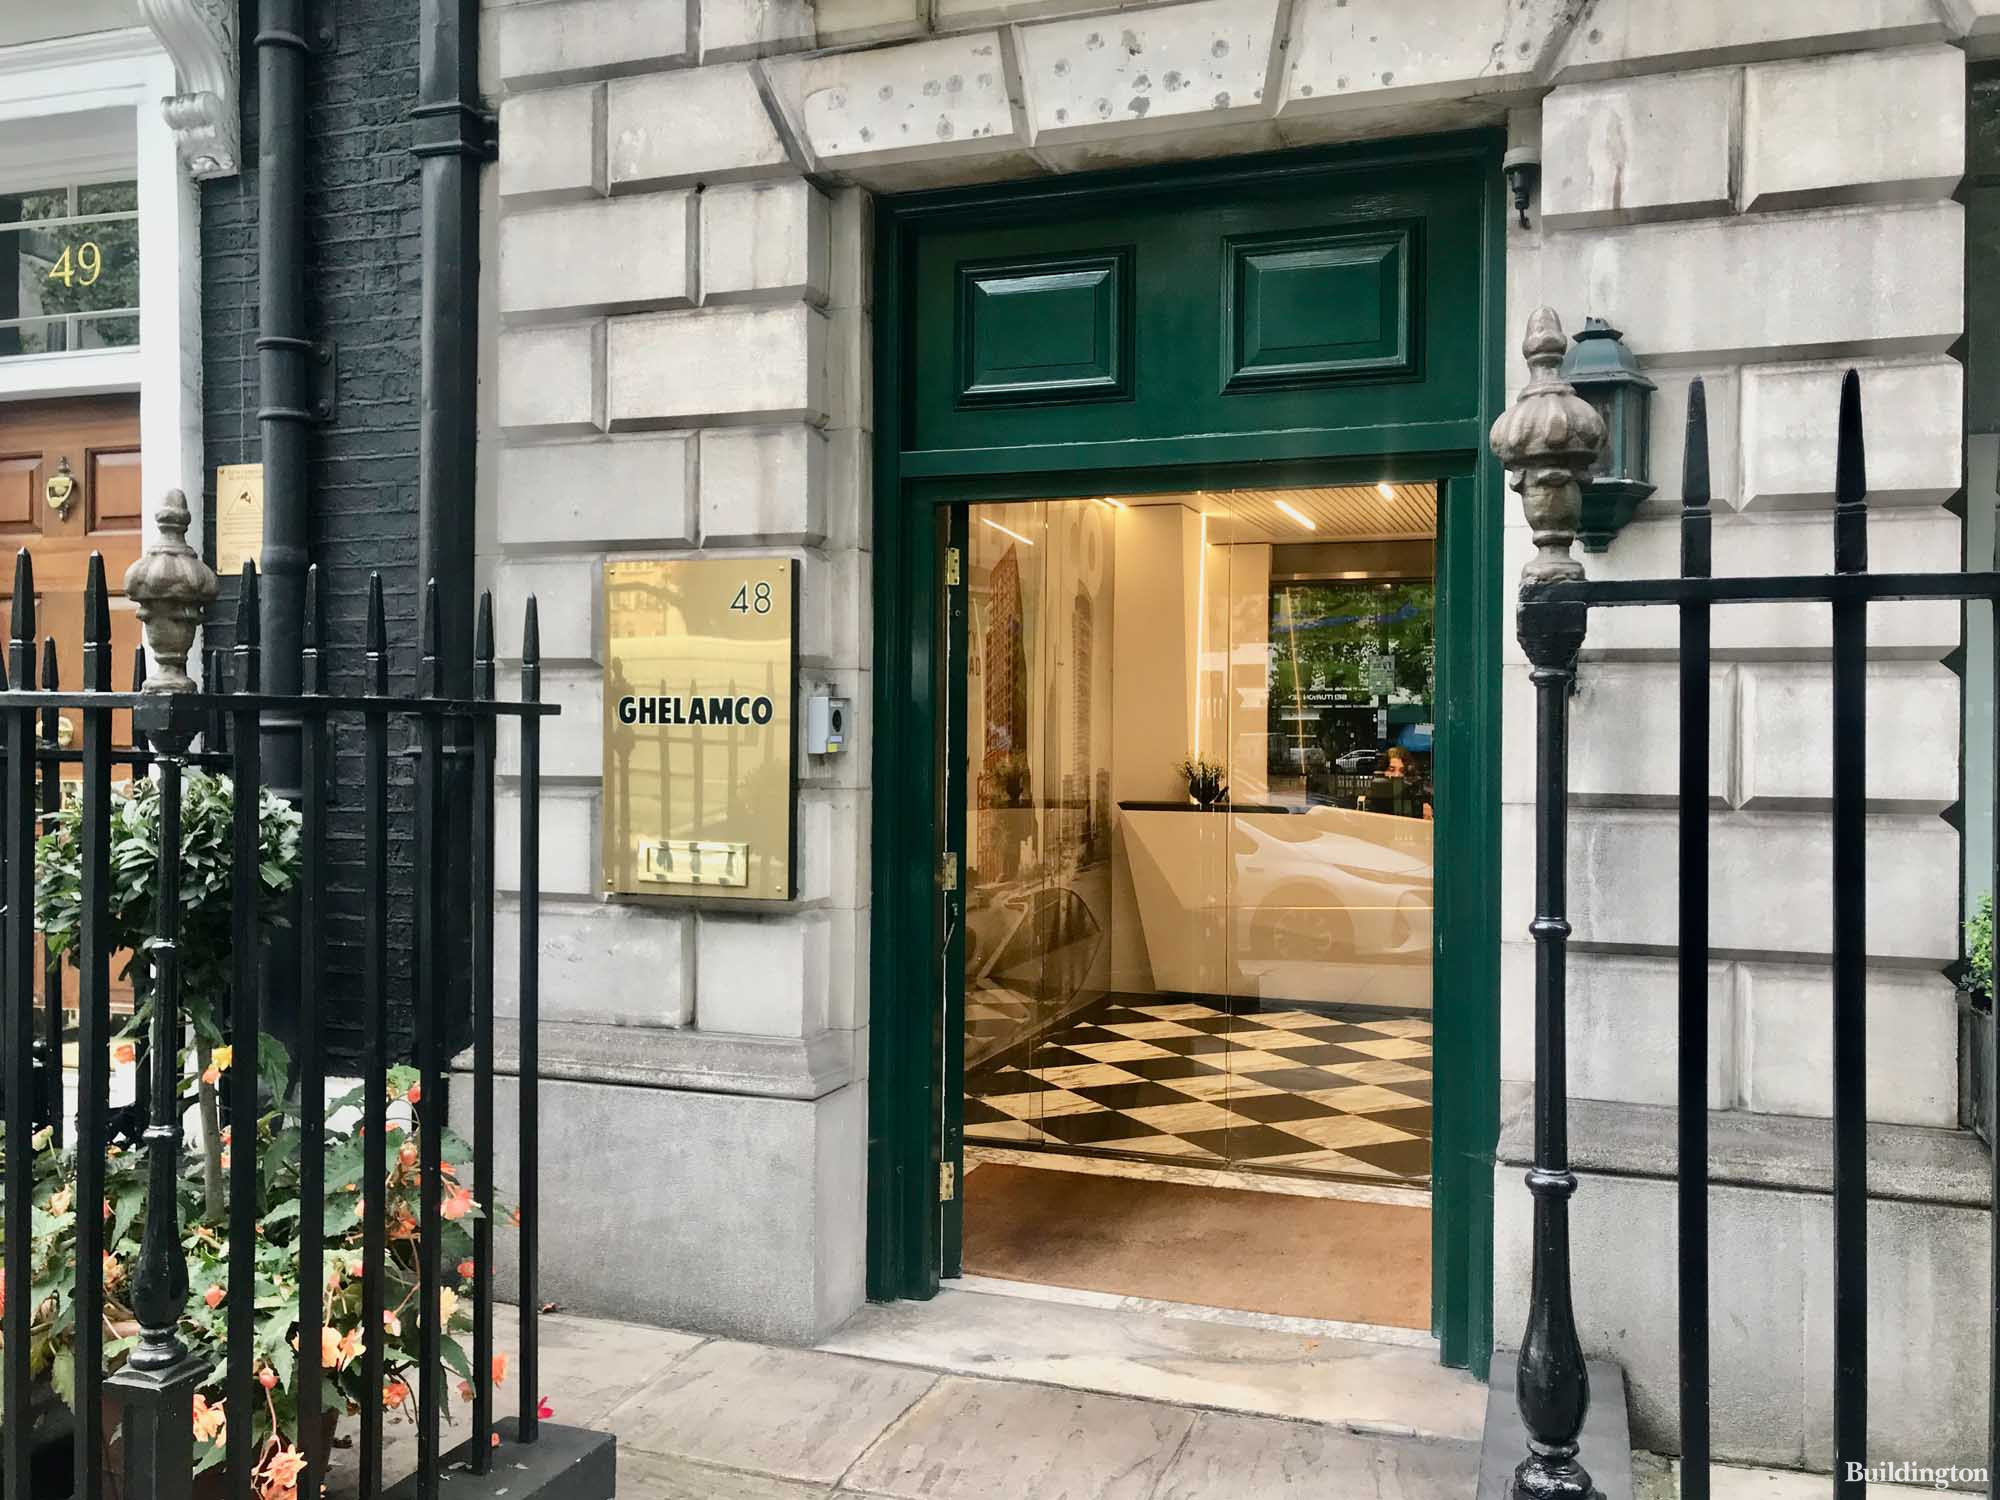 Developer Ghelamco offices at 48 Berkeley Square in Mayfair, London W1.